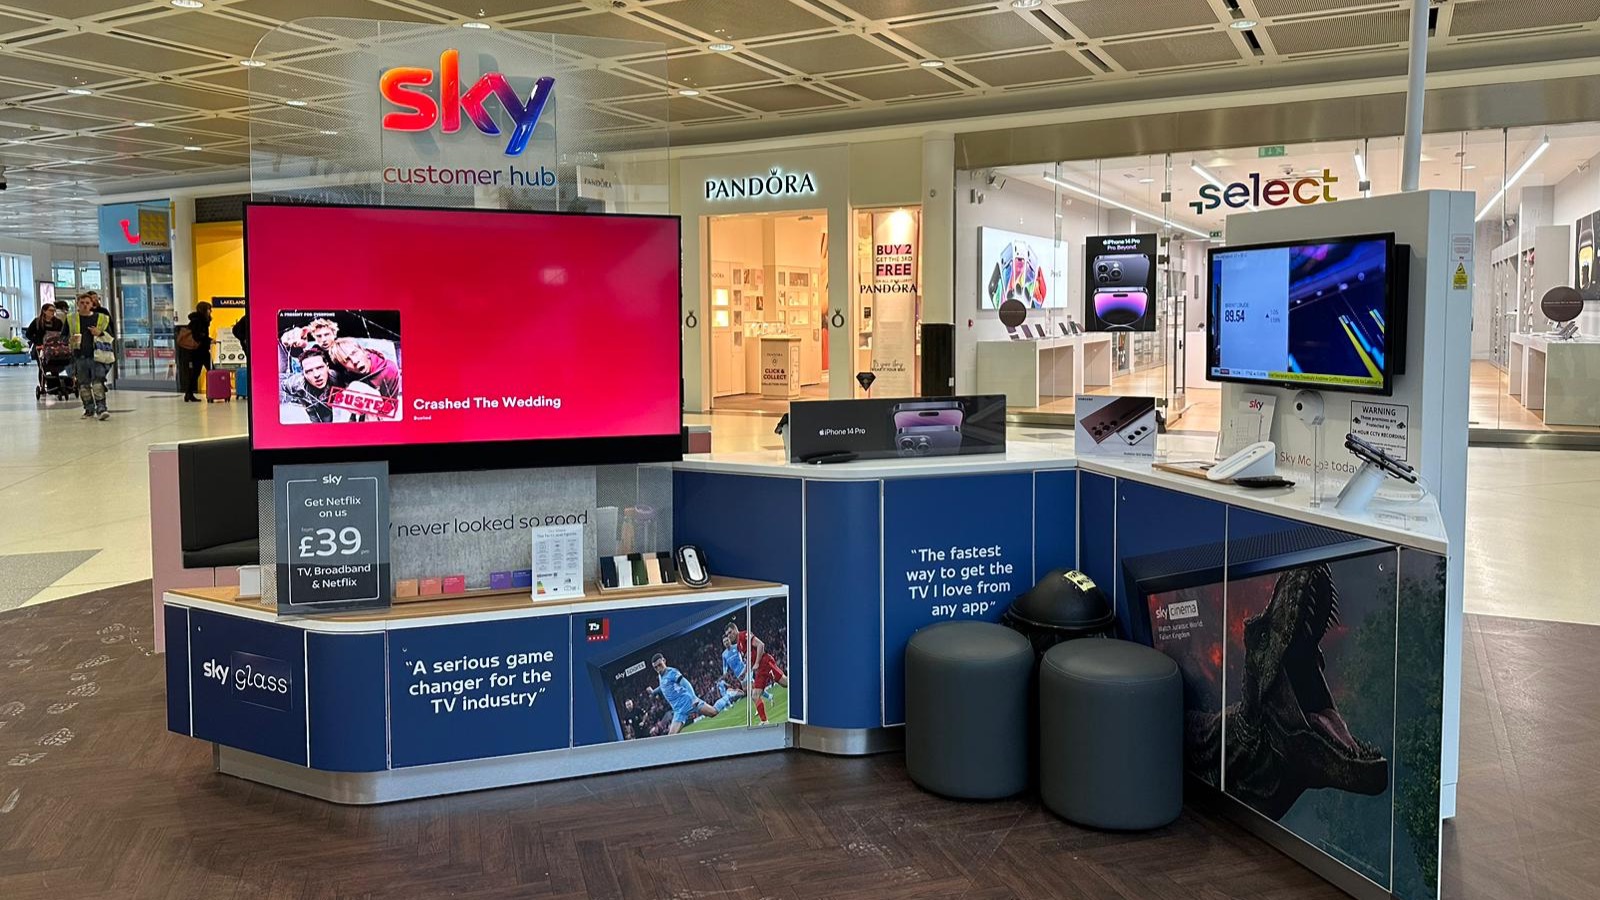 Sky Store Eastgate Shopping Centre, Inverness